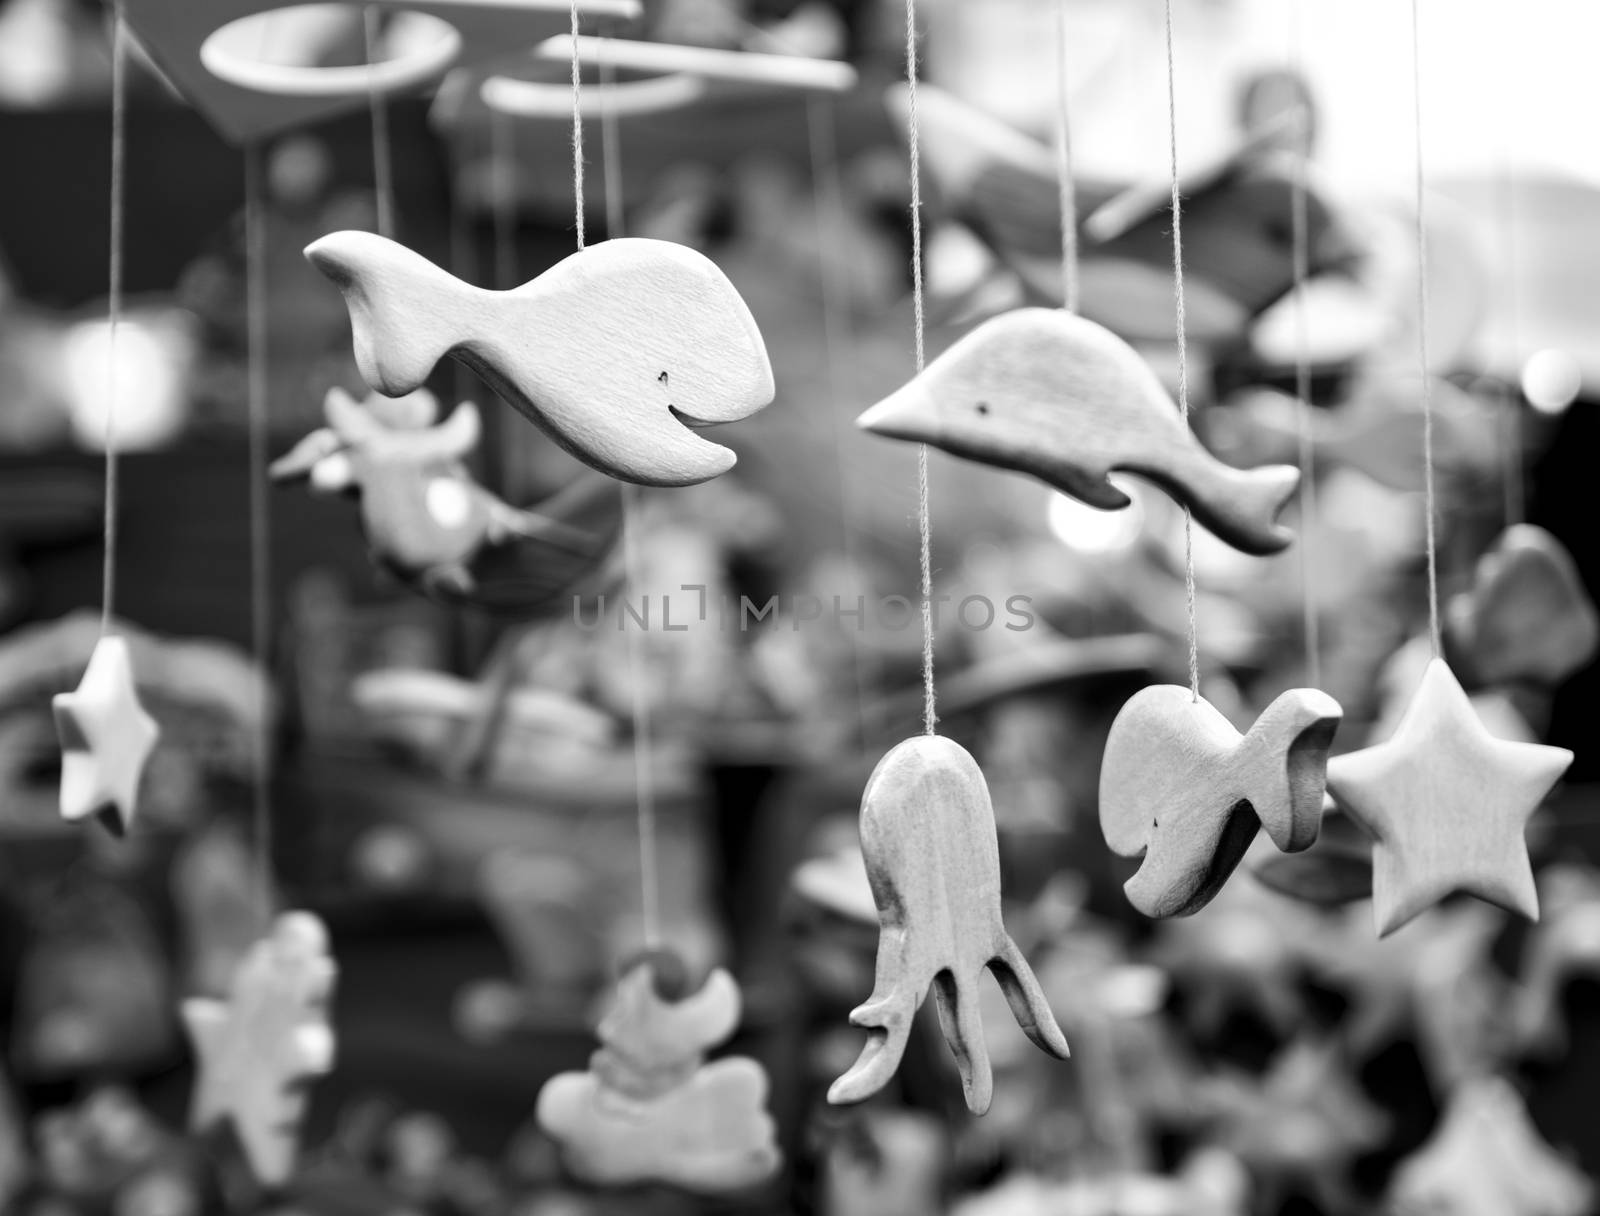 wooden decorative fishes by Isaac74